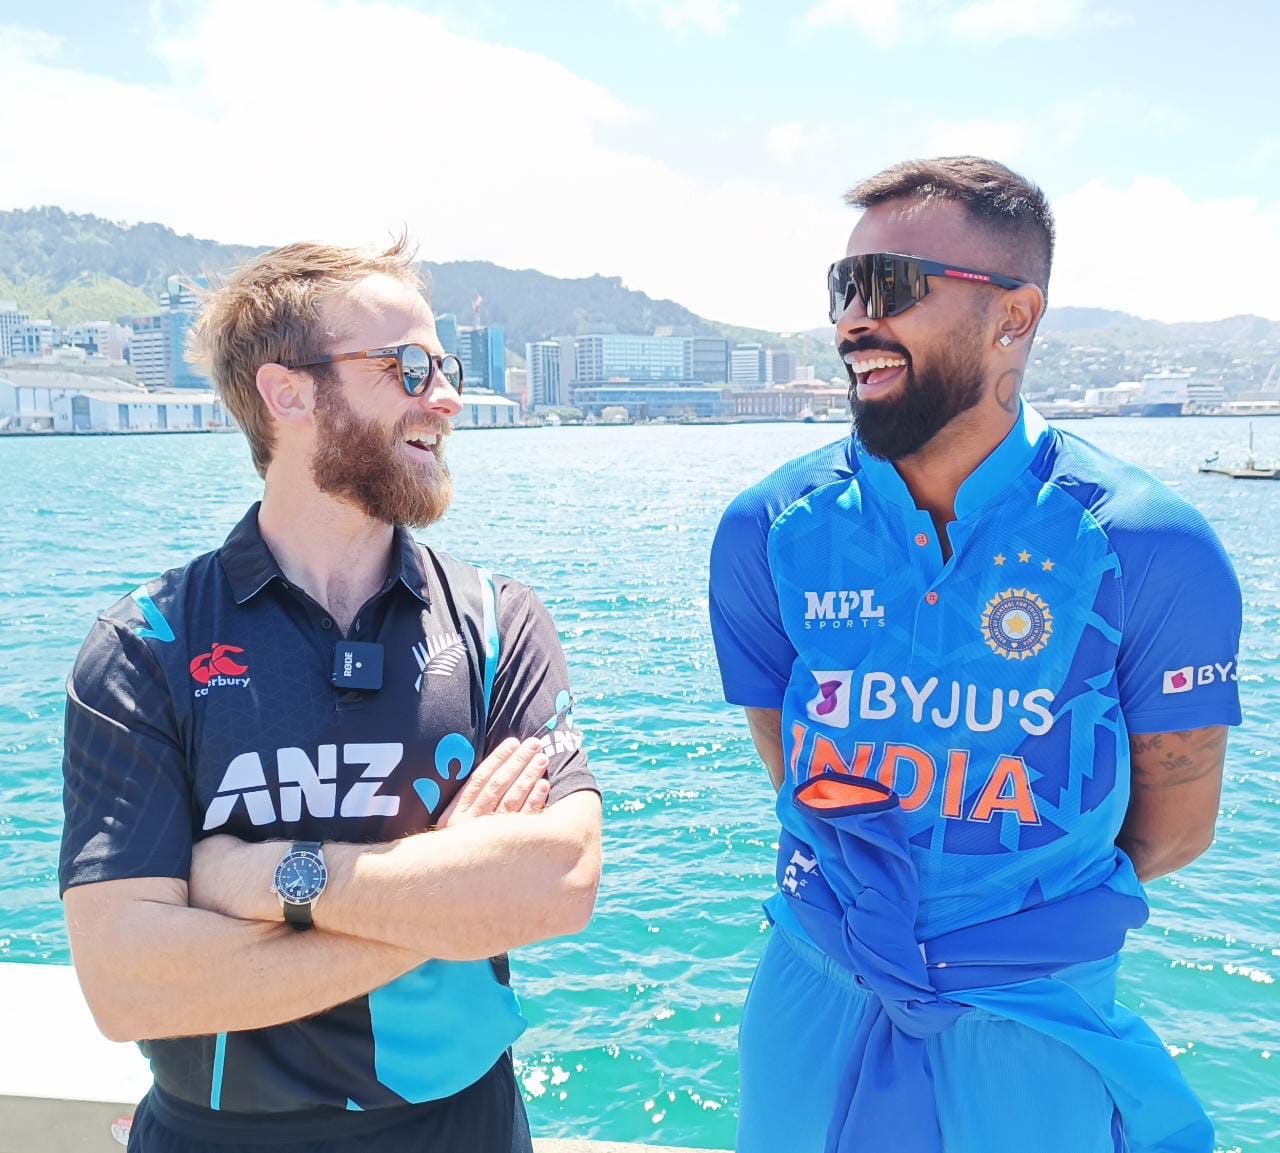 IND NZ T20 Series: Hardik Pandya, Kane Williamson releases India vs NewZealand T20 Series TROPHY, 1st match starts FRIDAY at 12: Follow IND vs NZ LIVE